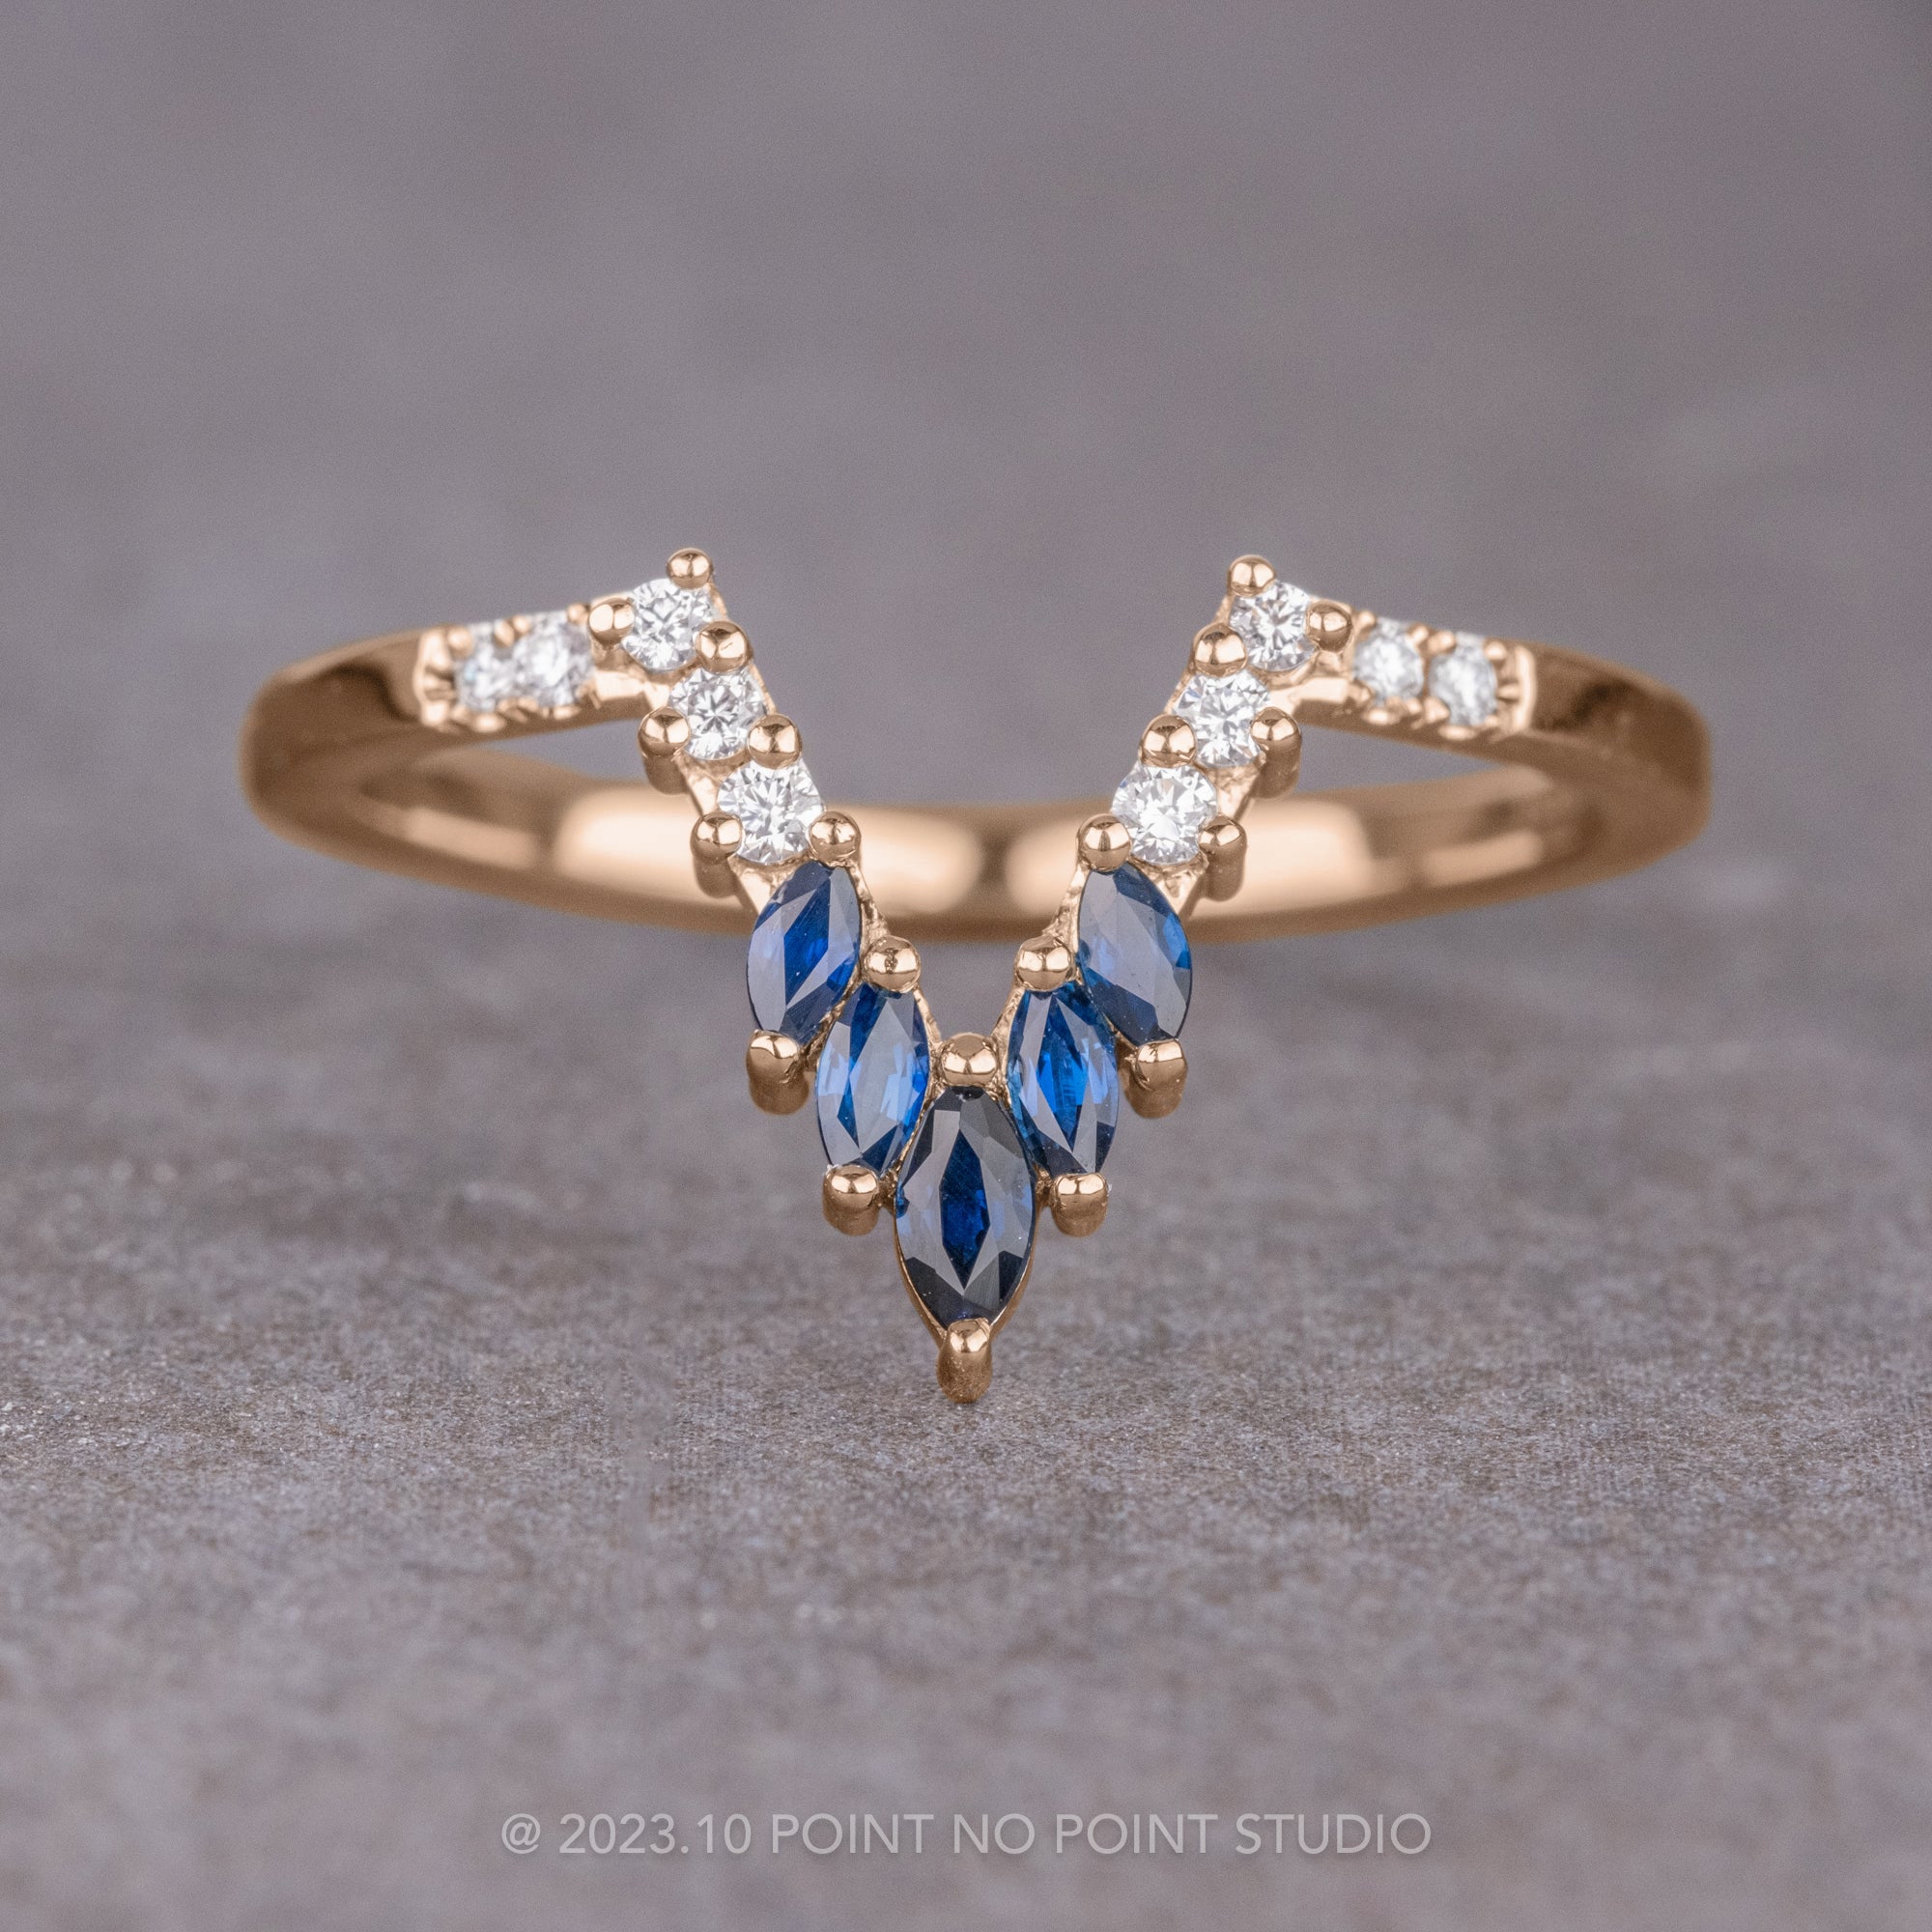 Blue Sapphire and Diamond 14kt White Gold Ring | Costco